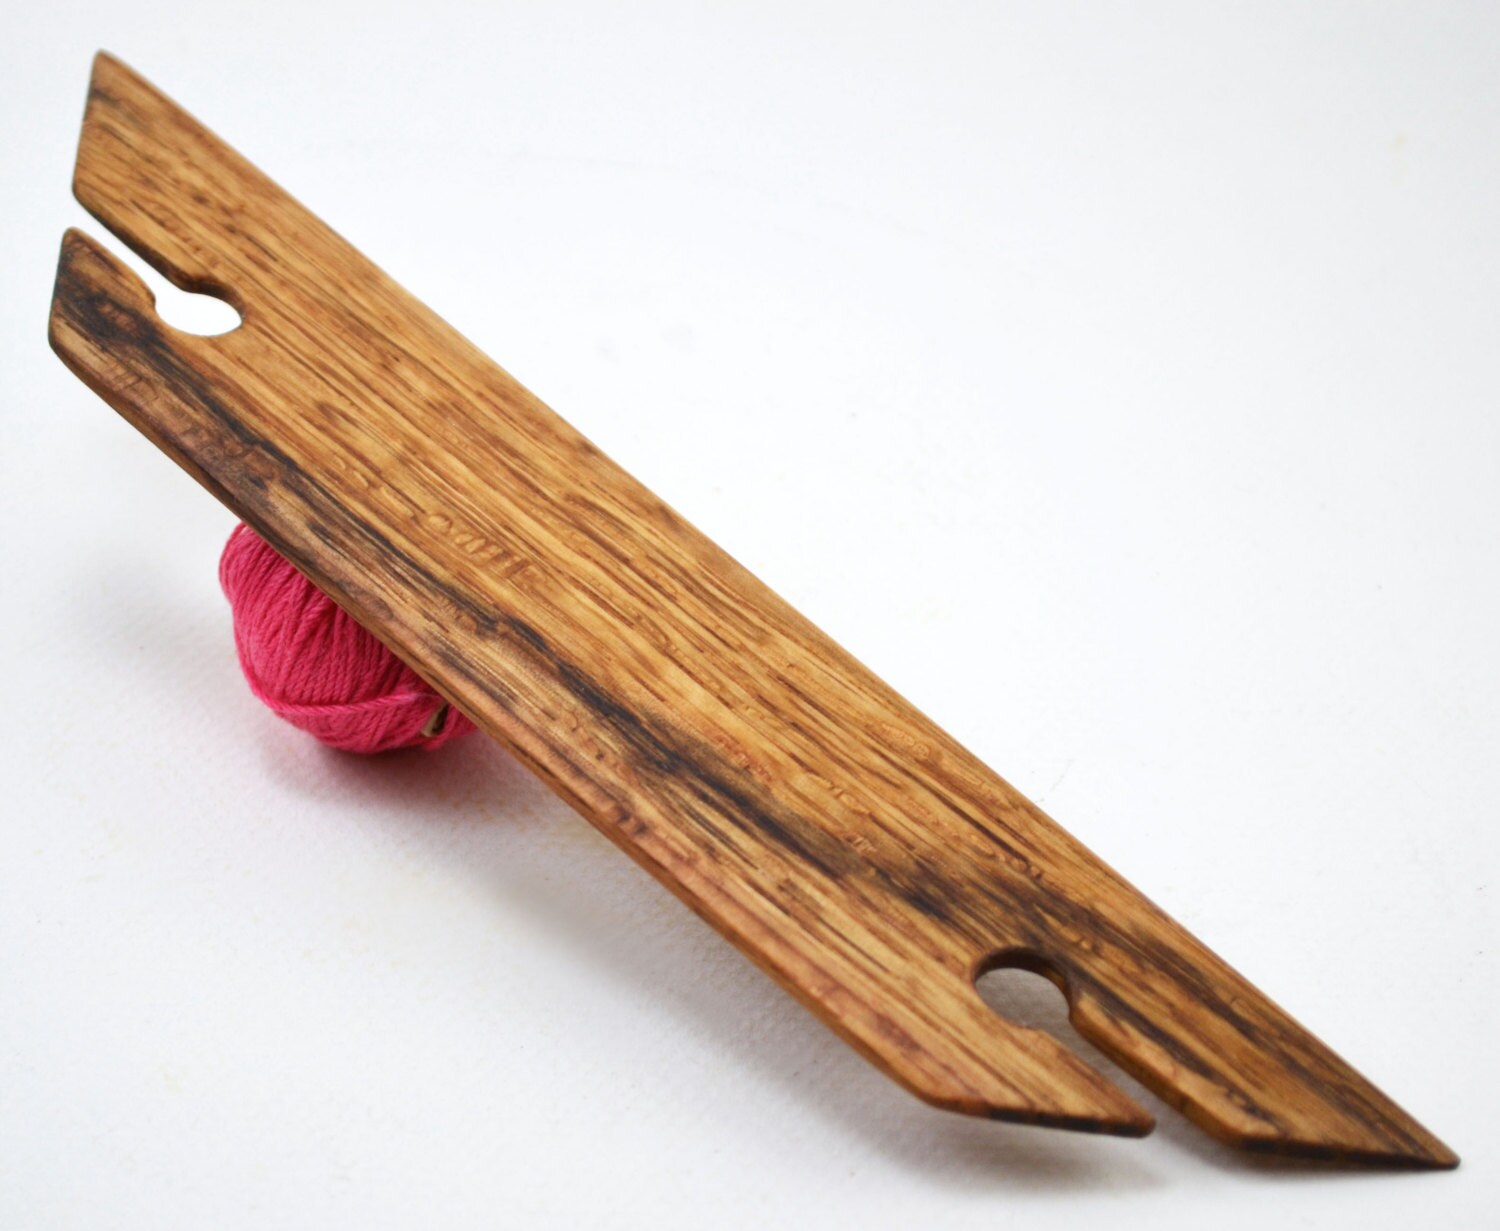 Small Inkle Loom for Belt, Tablet or Card Weaving - Handmade from Maple and  Oak